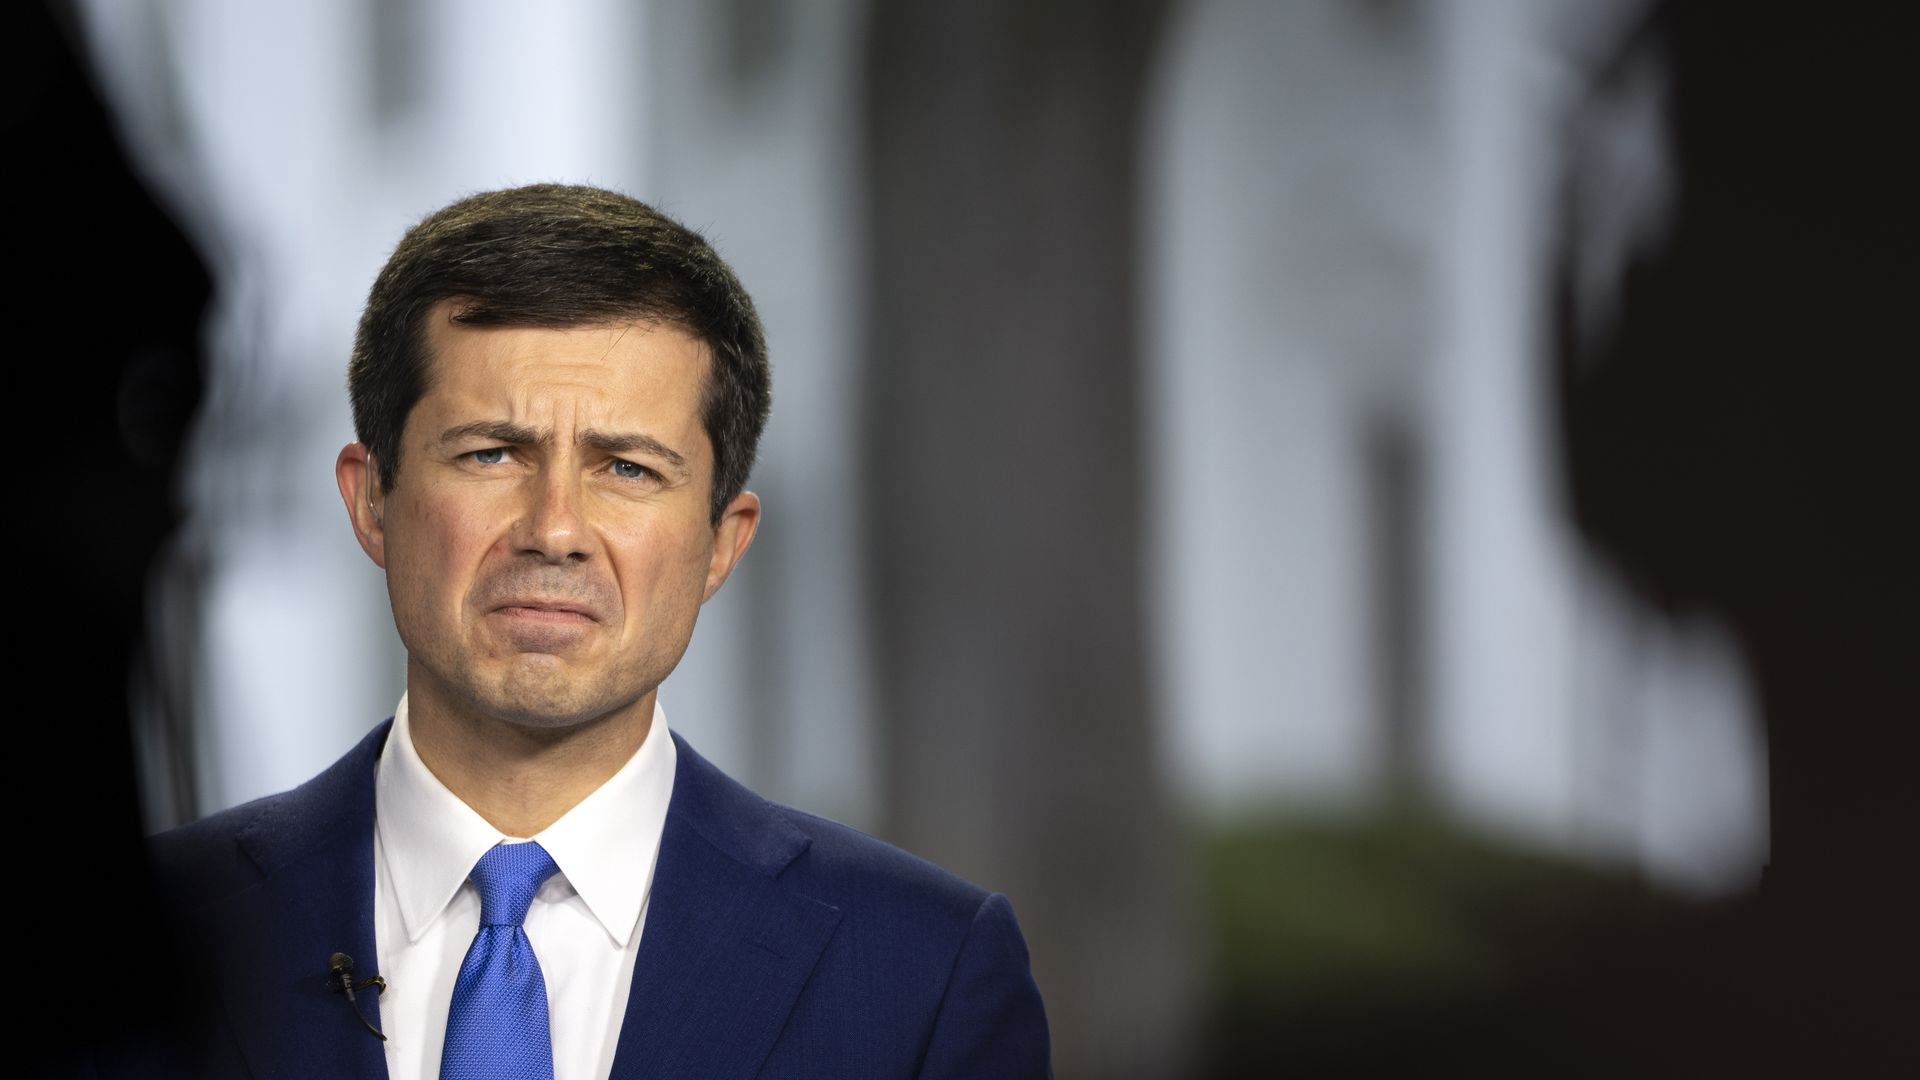 Pete Buttigieg scowls during a television interview in front of the White House